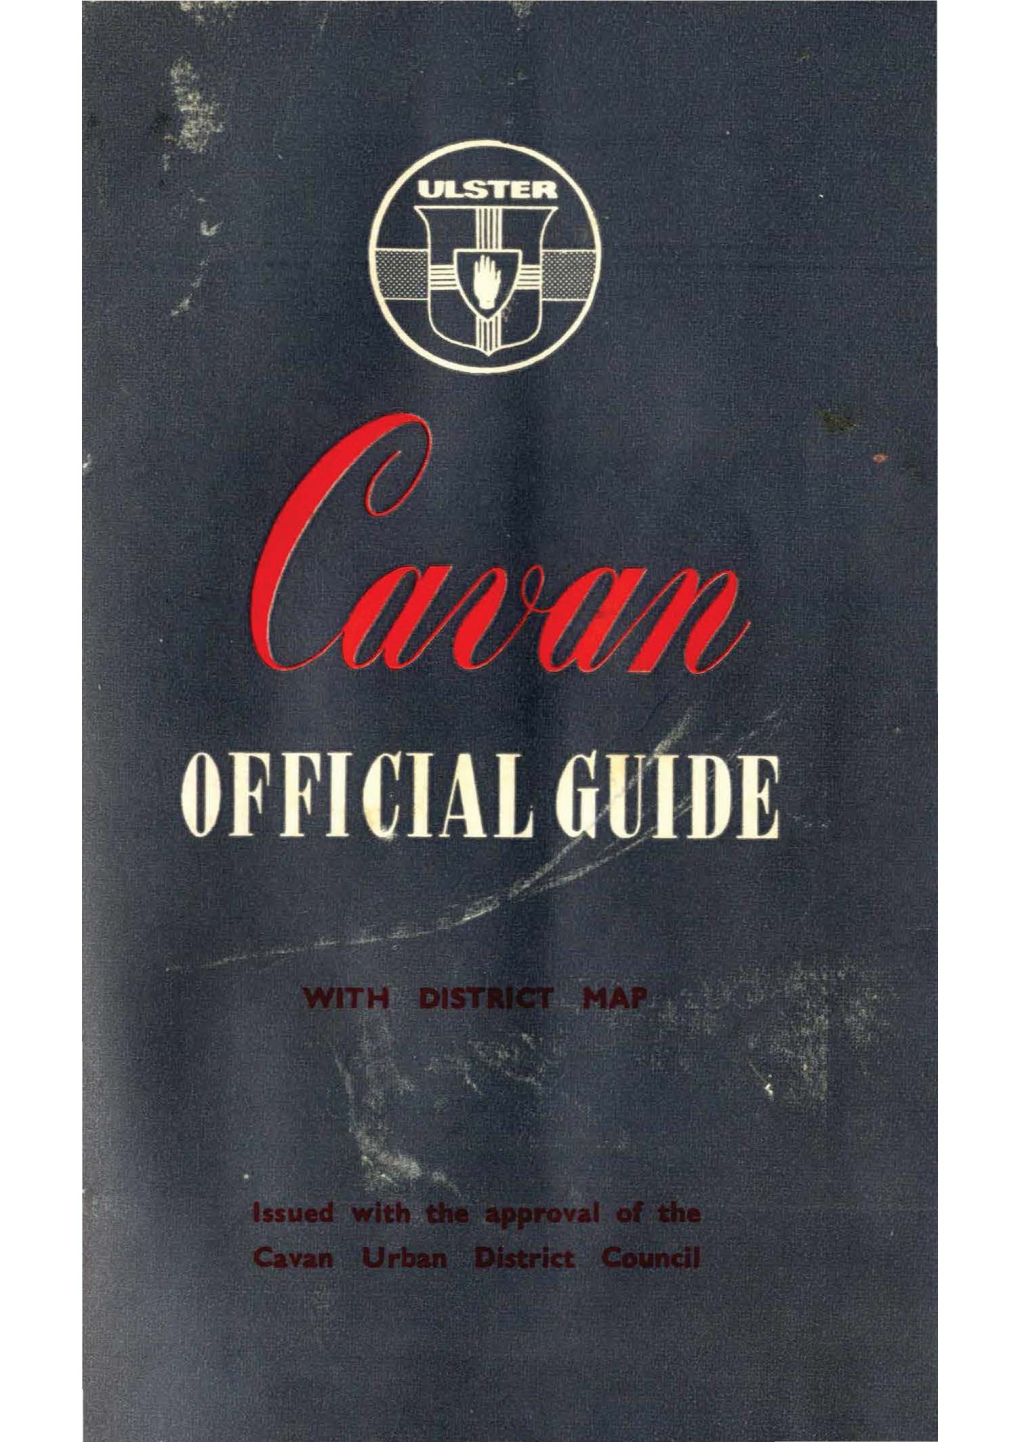 The Official Guide to Cavan